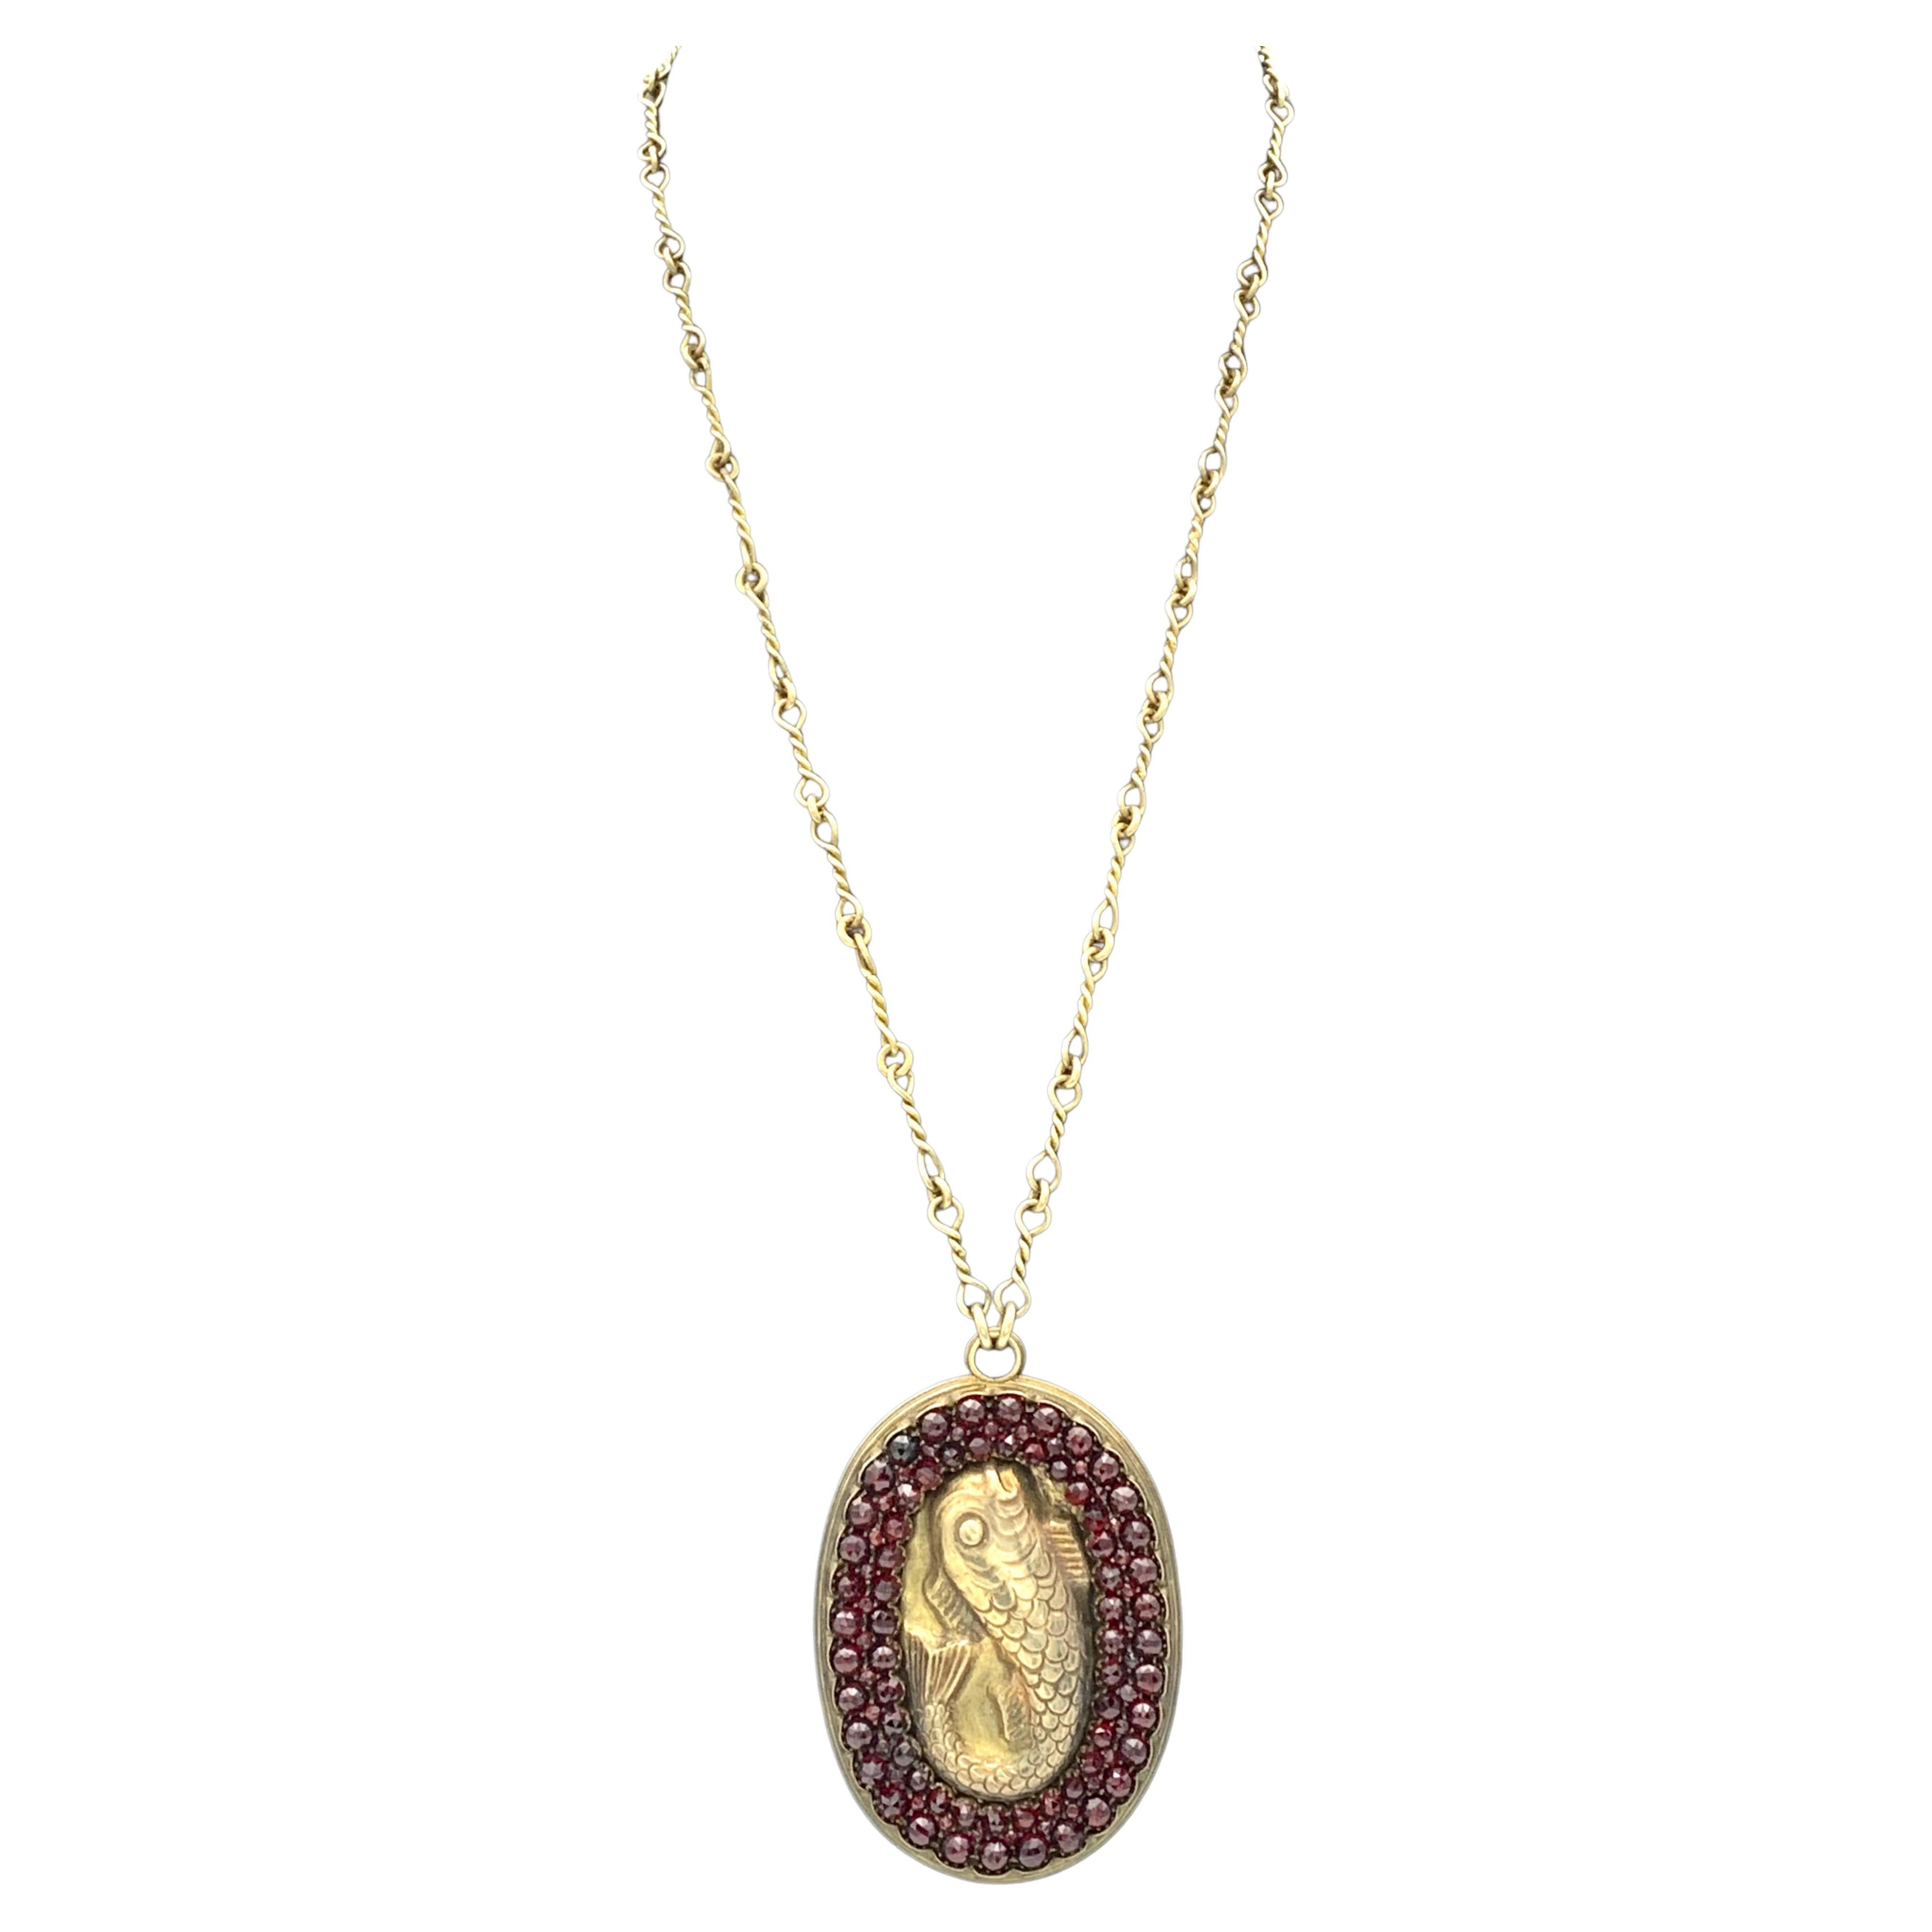 The pendant is set with three rows of graduated facetted garnets in various sizes. within anondulated frame. 
The length of the handmade  chain without the pendant meassures 26 cm, the pendant 7.1 cm. 
The pendant comes in its original unpolished